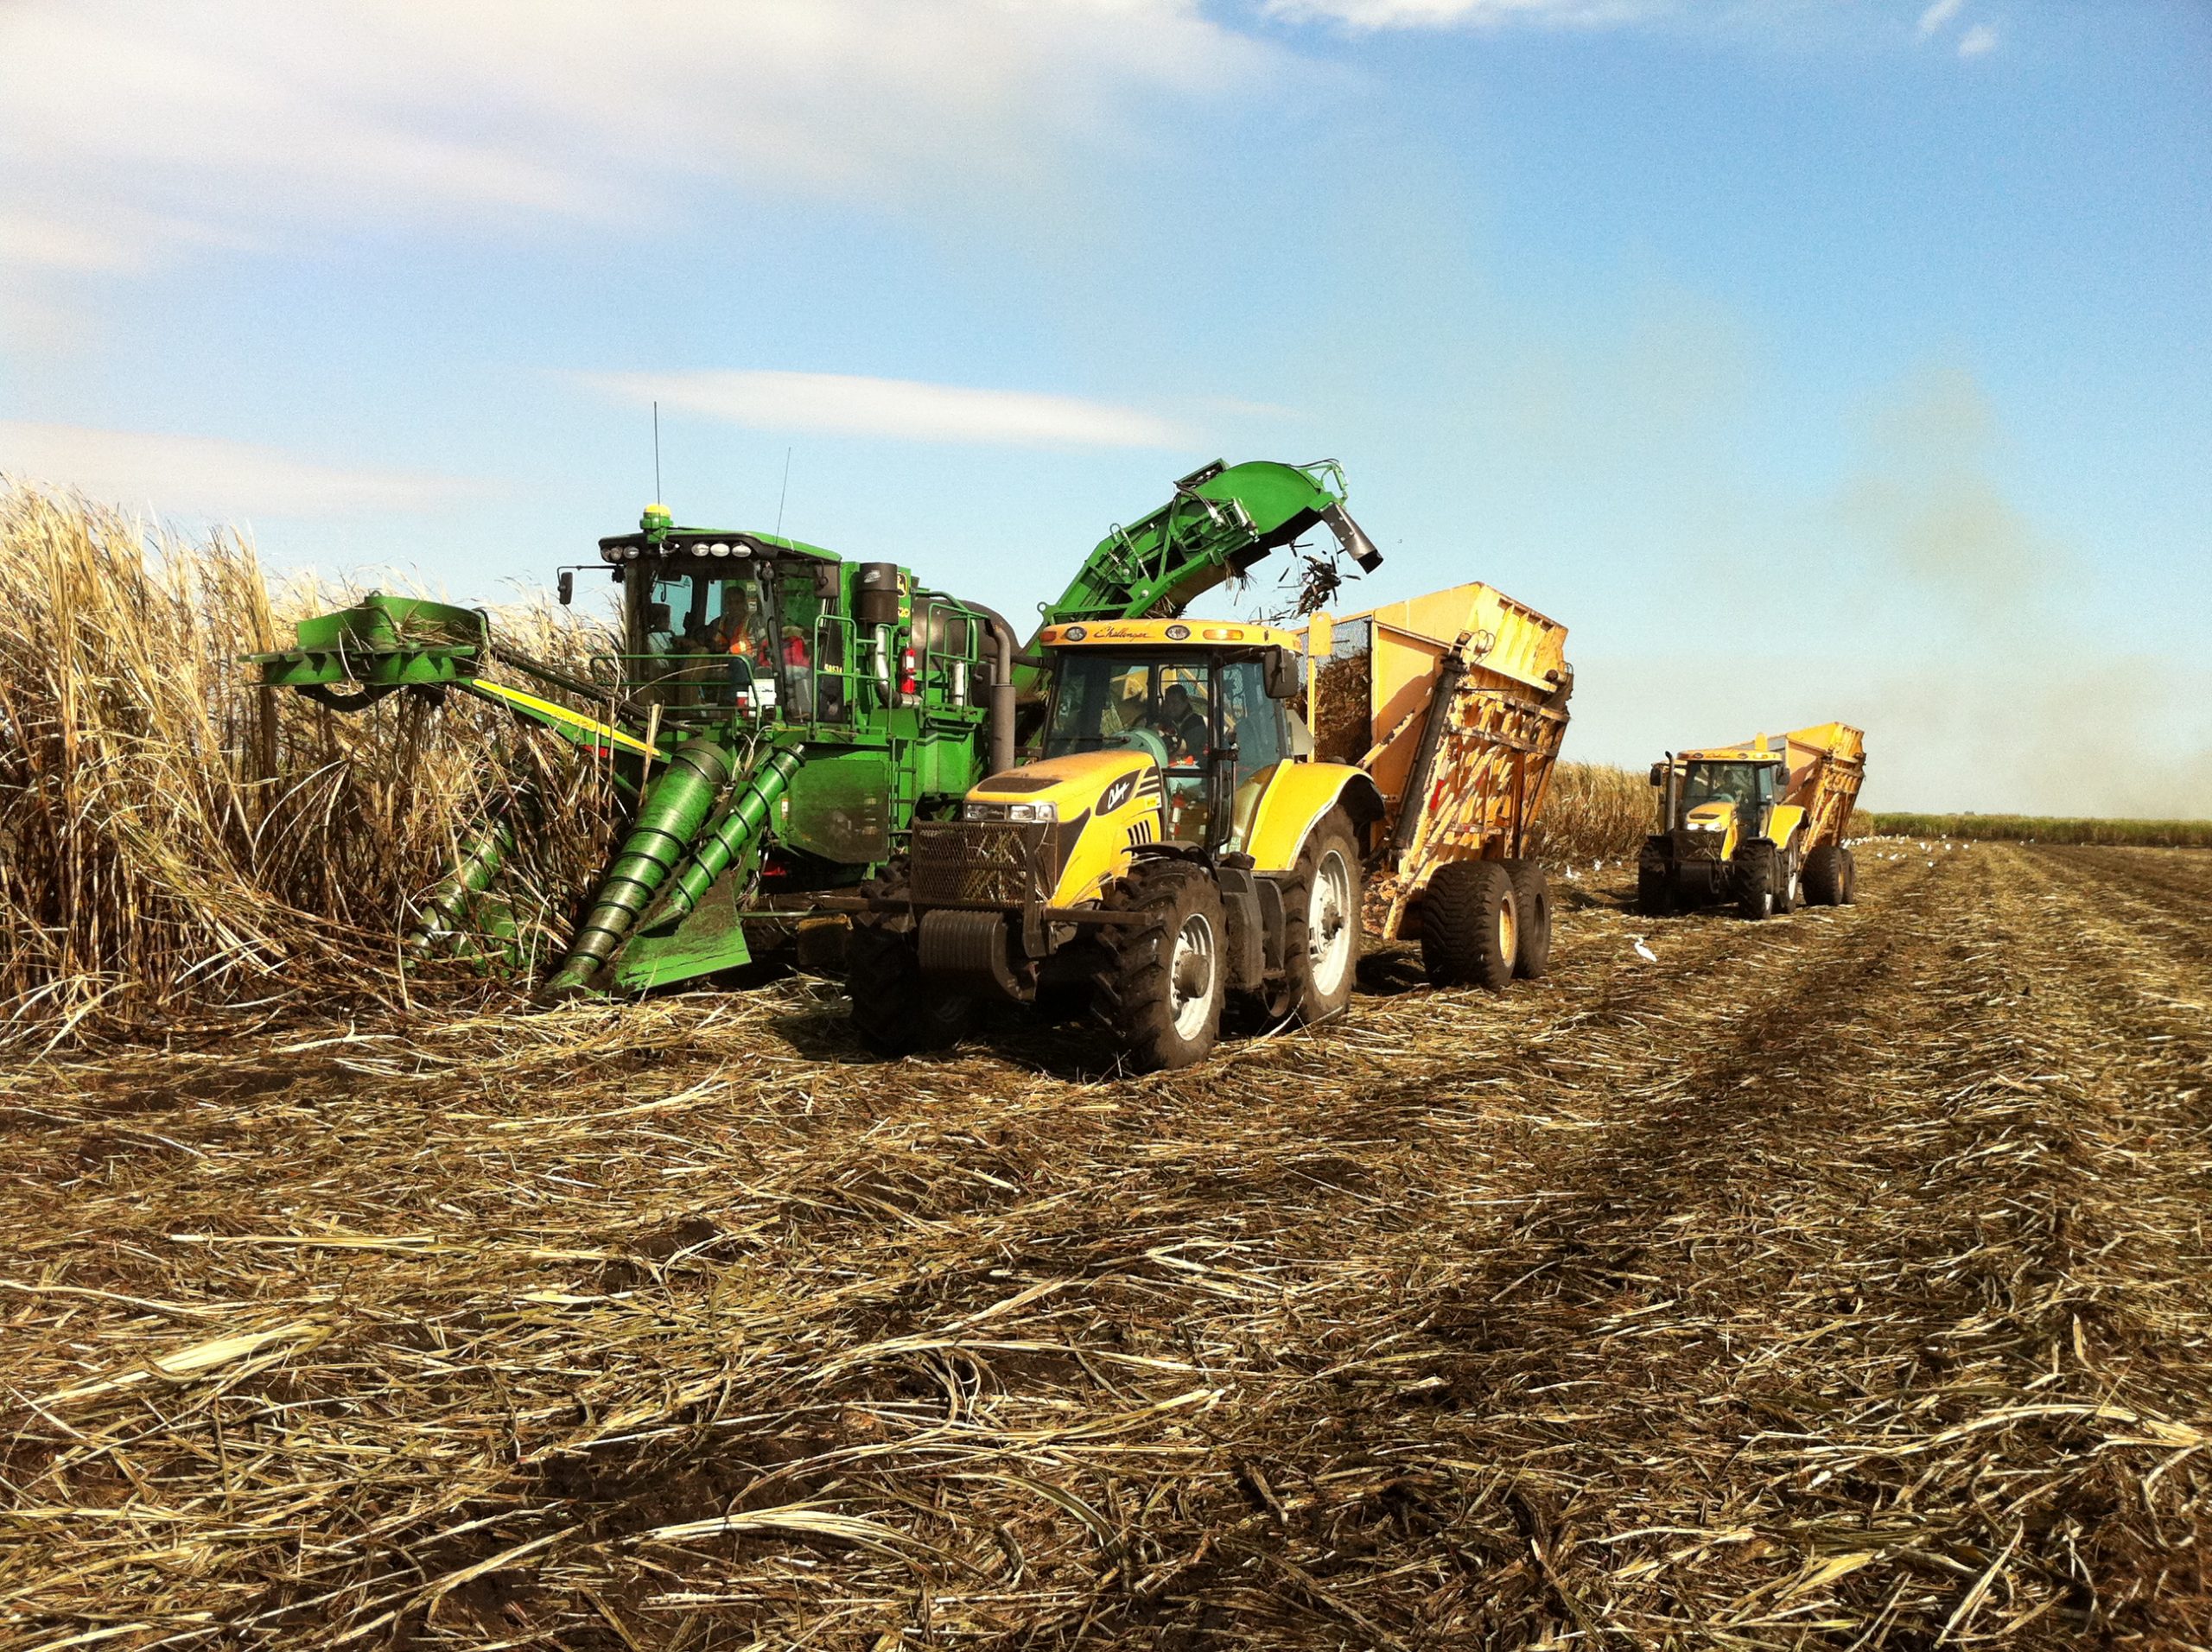 Ten Interesting Things About U.S. Sugar I Learned This Harvest Season